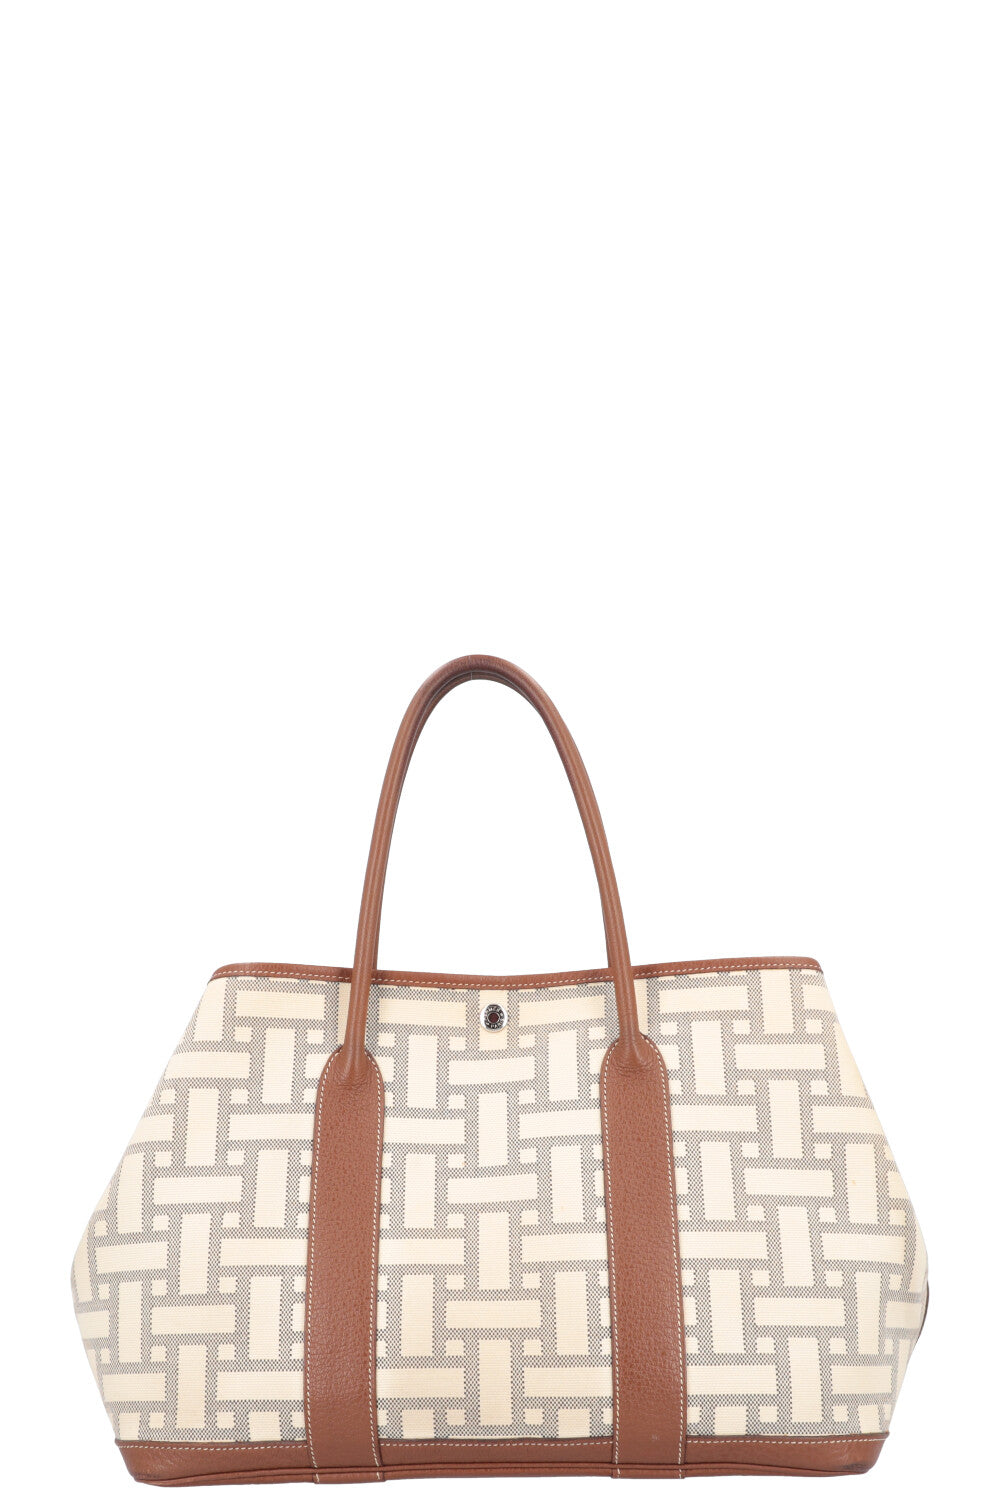 Hermes Garden party GM36 (clemence/toffee) + Hermes Twilly +